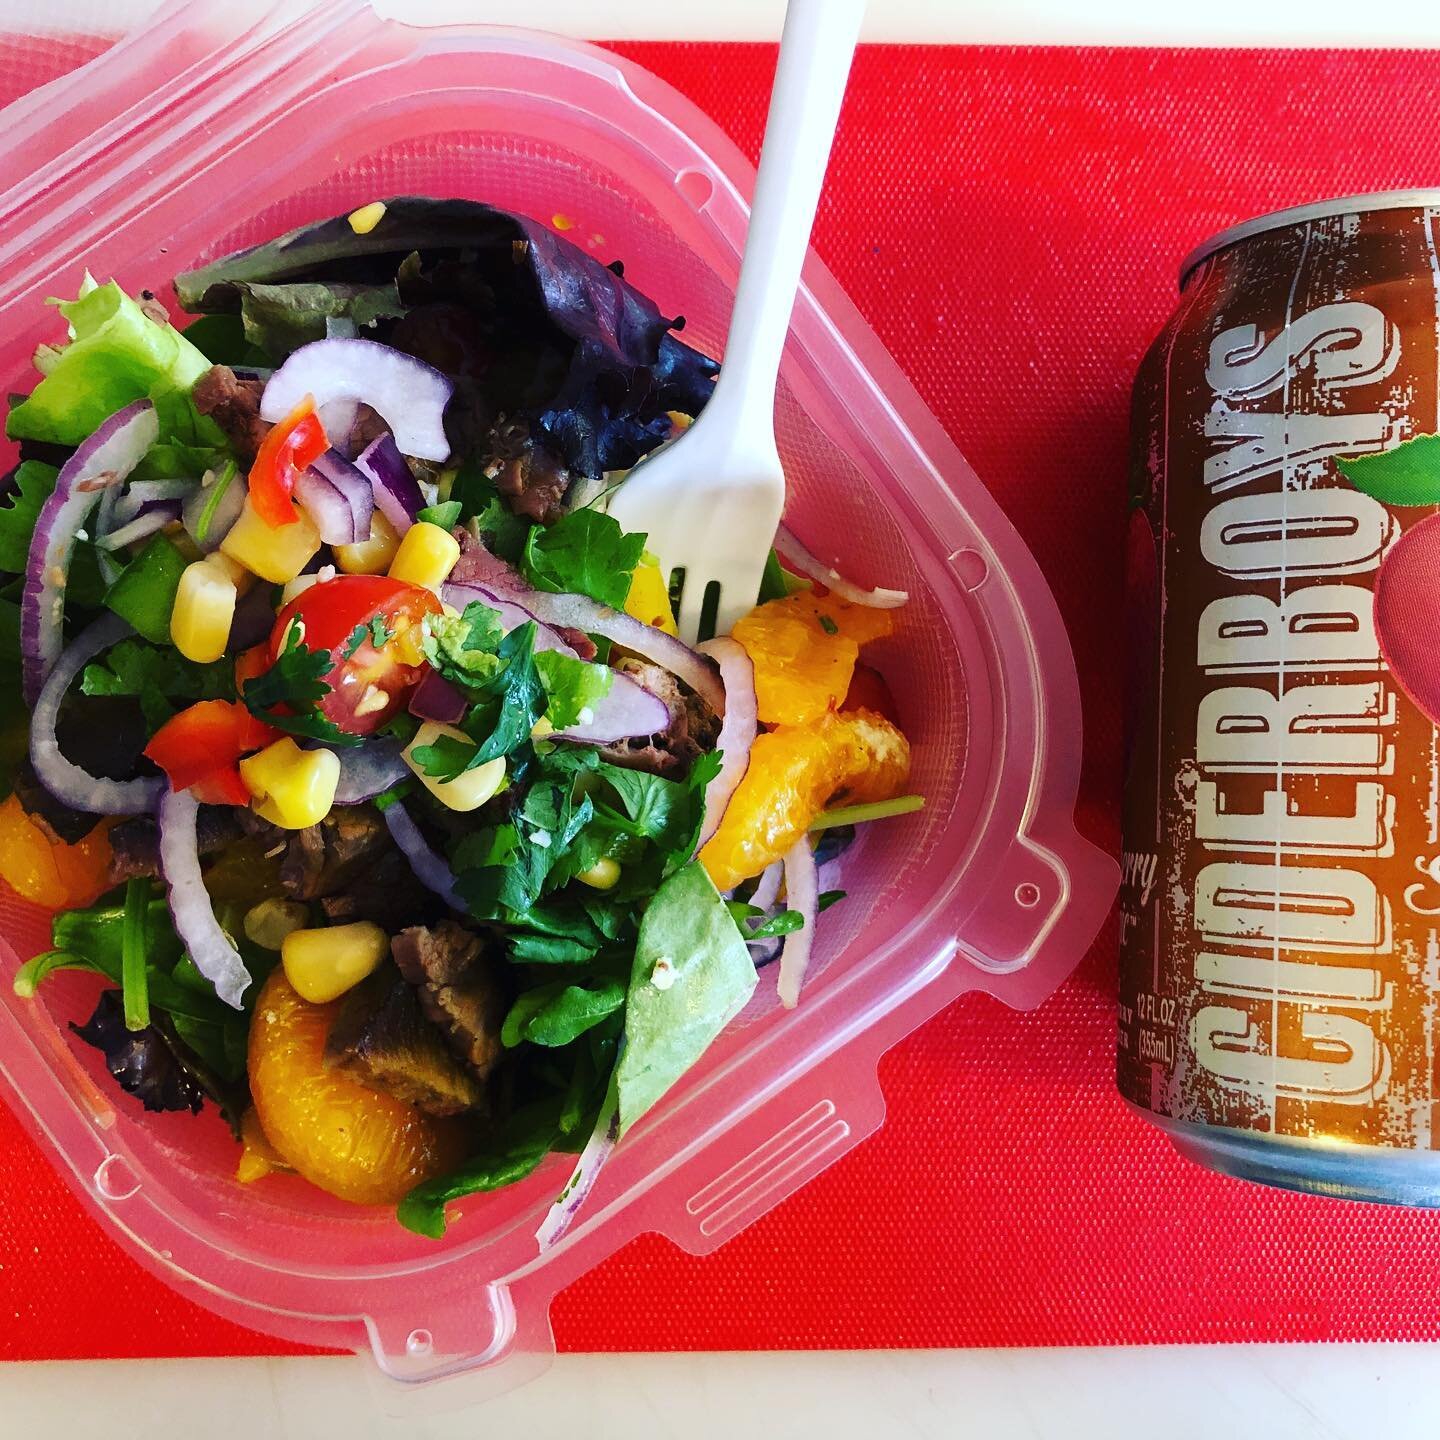 TGIF! Need a super quick and easy lunch? We&rsquo;ve got your back! How about a small Tritip salad for $6?  It&rsquo;s layered with our refreshing corn salad , red onions and mandarin oranges. Your choice of spicy or mild BBQ sauce. If you&rsquo;re l